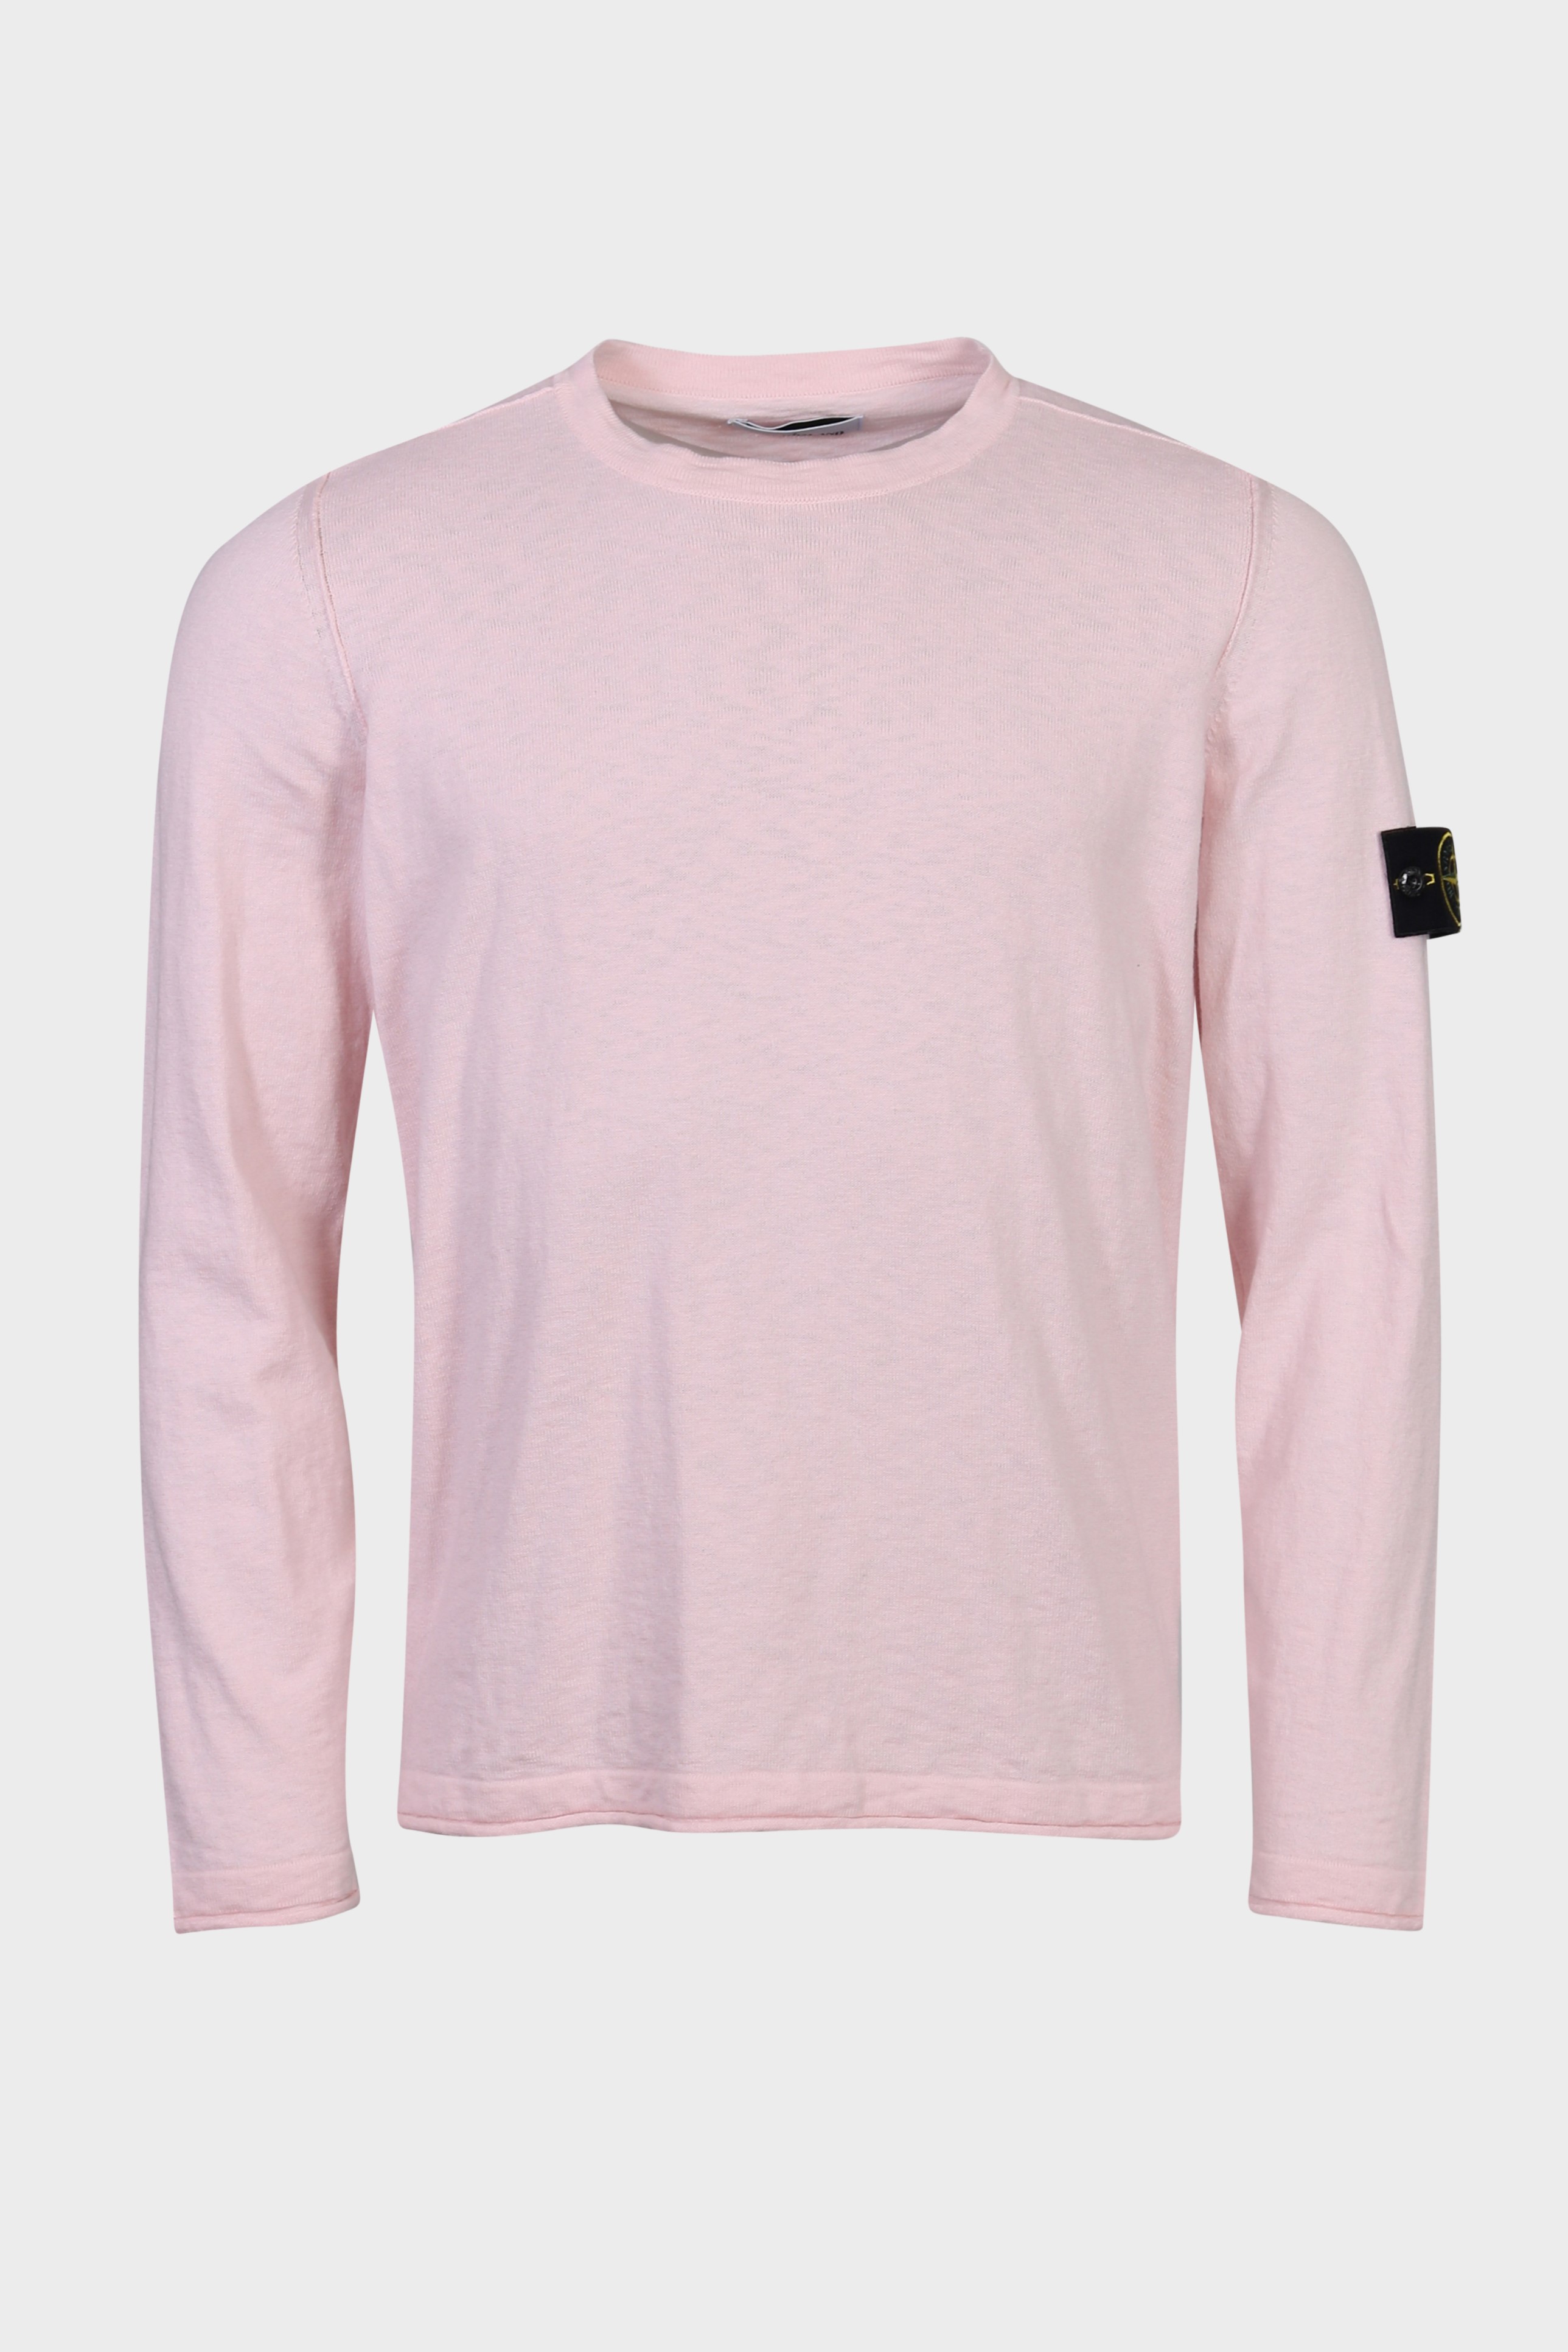 STONE ISLAND Summer Knit Pullover in Light Pink 2XL